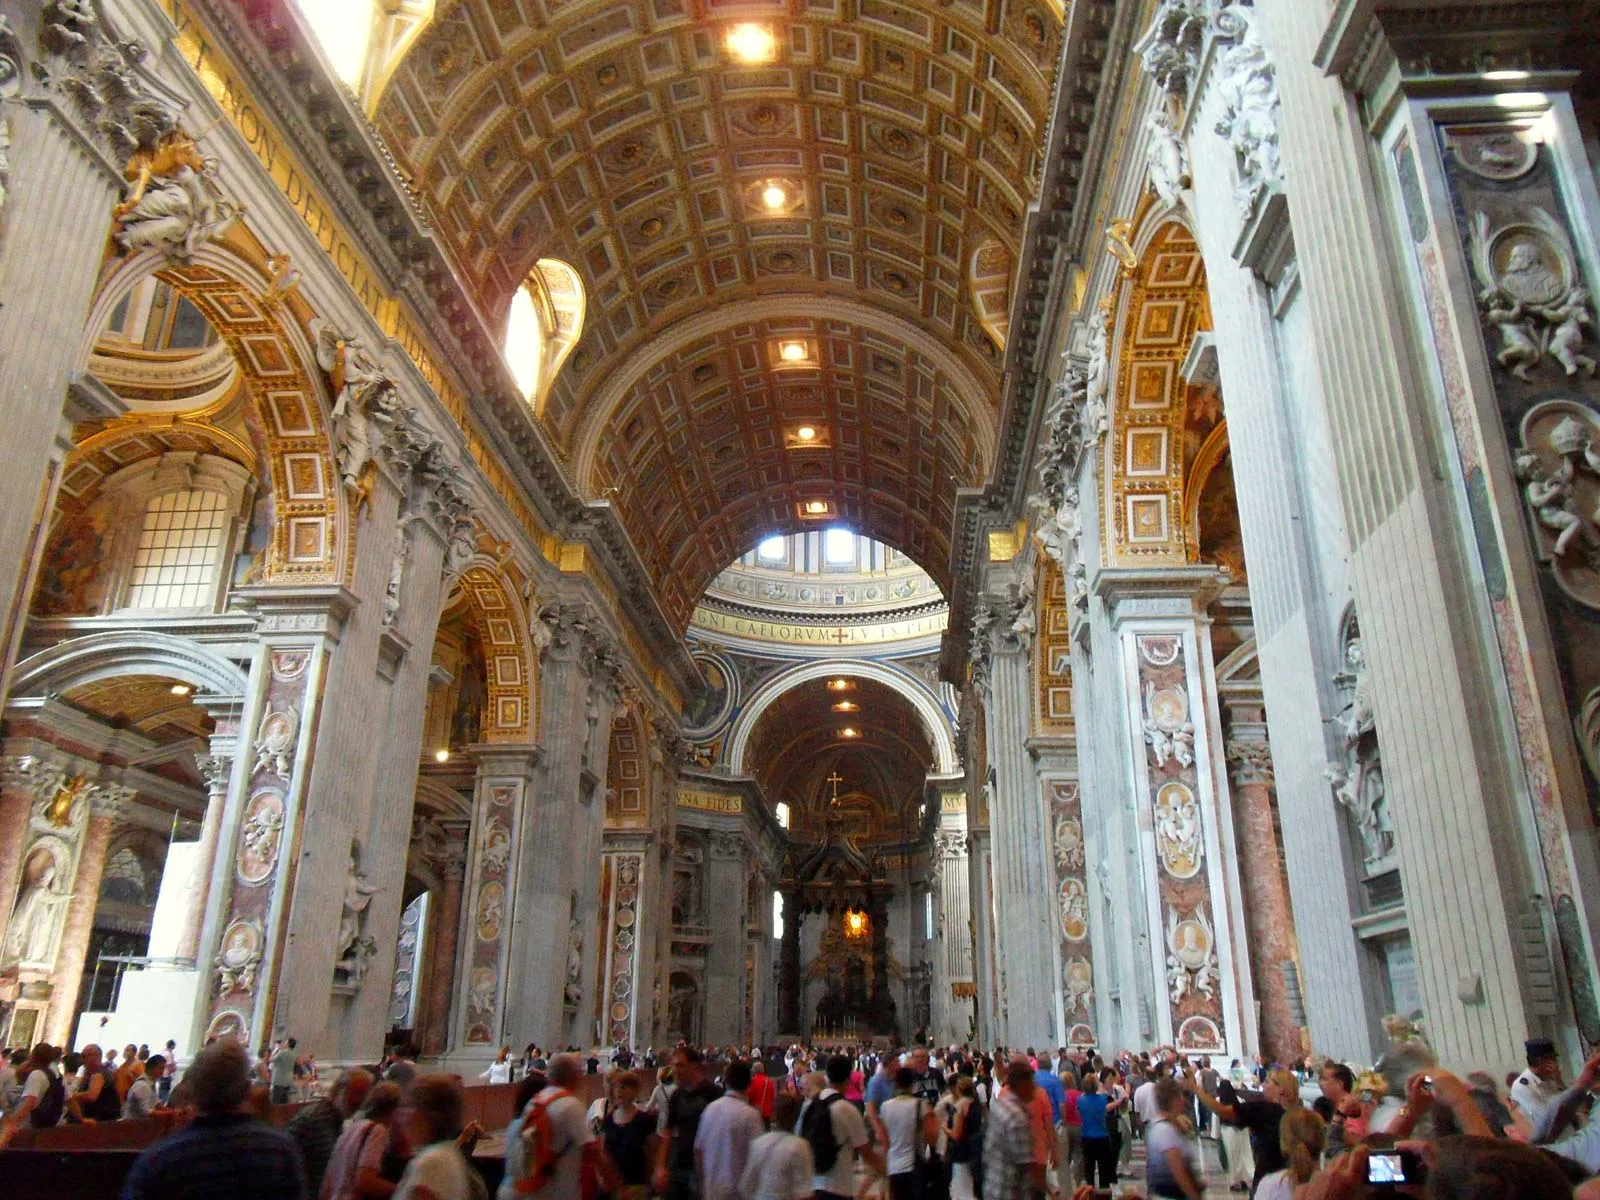 Which Best Describes The Architectural Features Of The Basilica